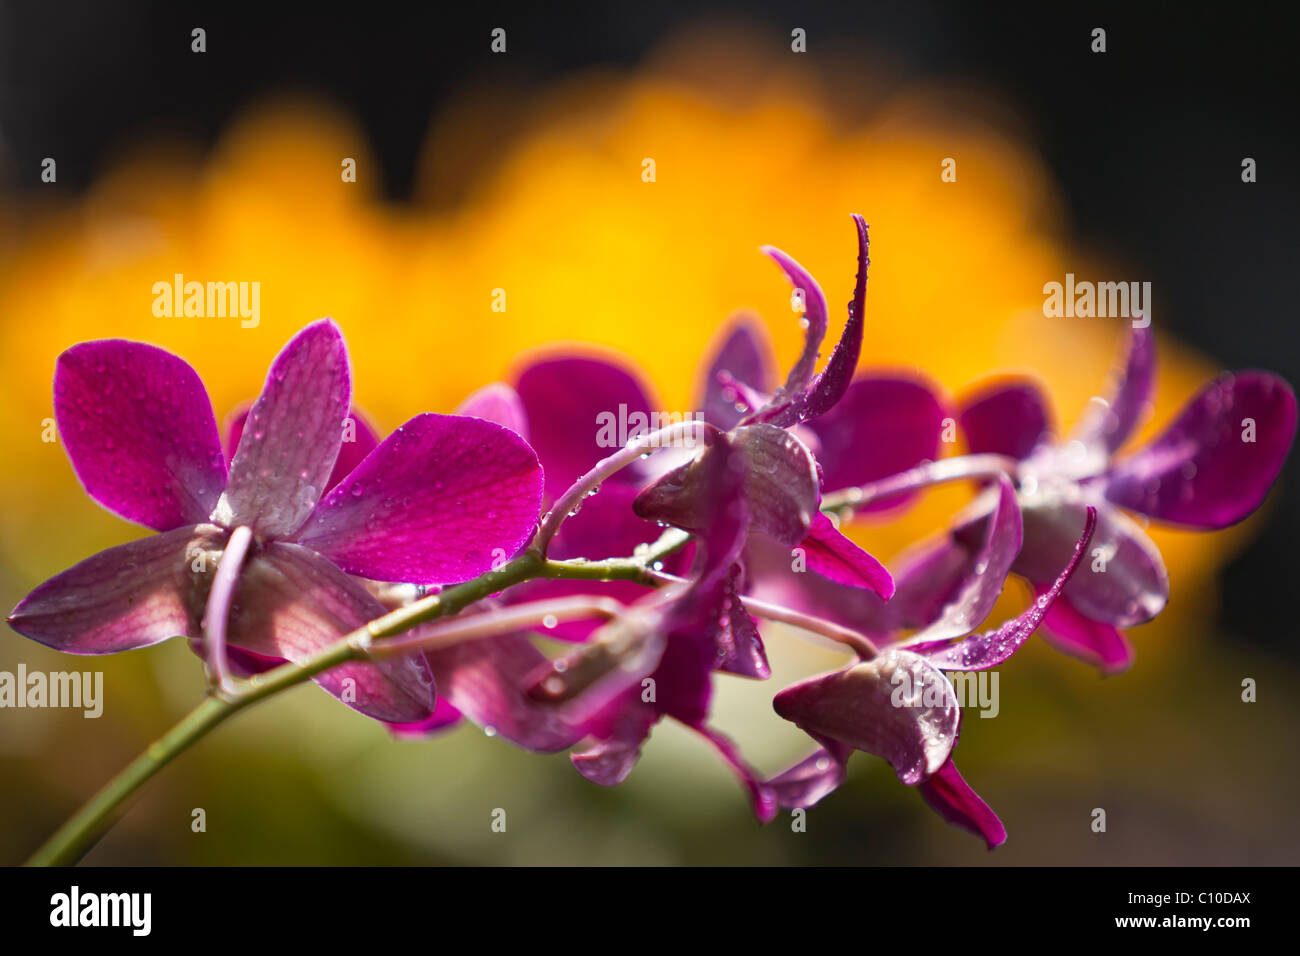 Photo of yellow and maroon Cattleya orchid in Hawaii using selective focus. Stock Photo